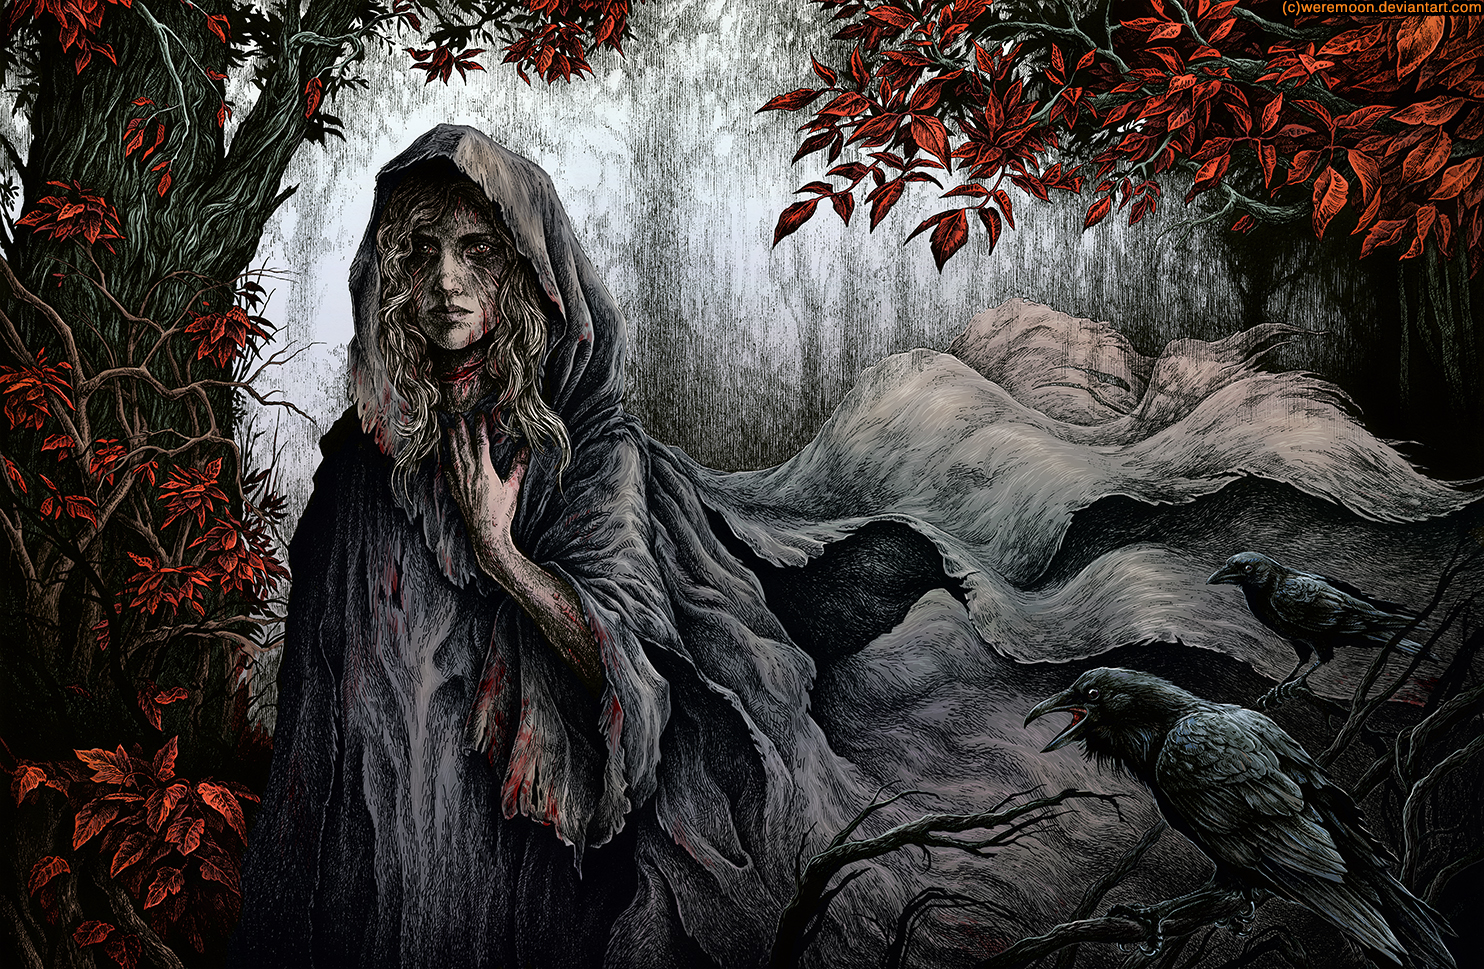 General 1484x969 fantasy art fantasy girl forest trees crow blood blonde long hair scars A Song of Ice and Fire Lady StoneHeart Weirwood Tree women digital art